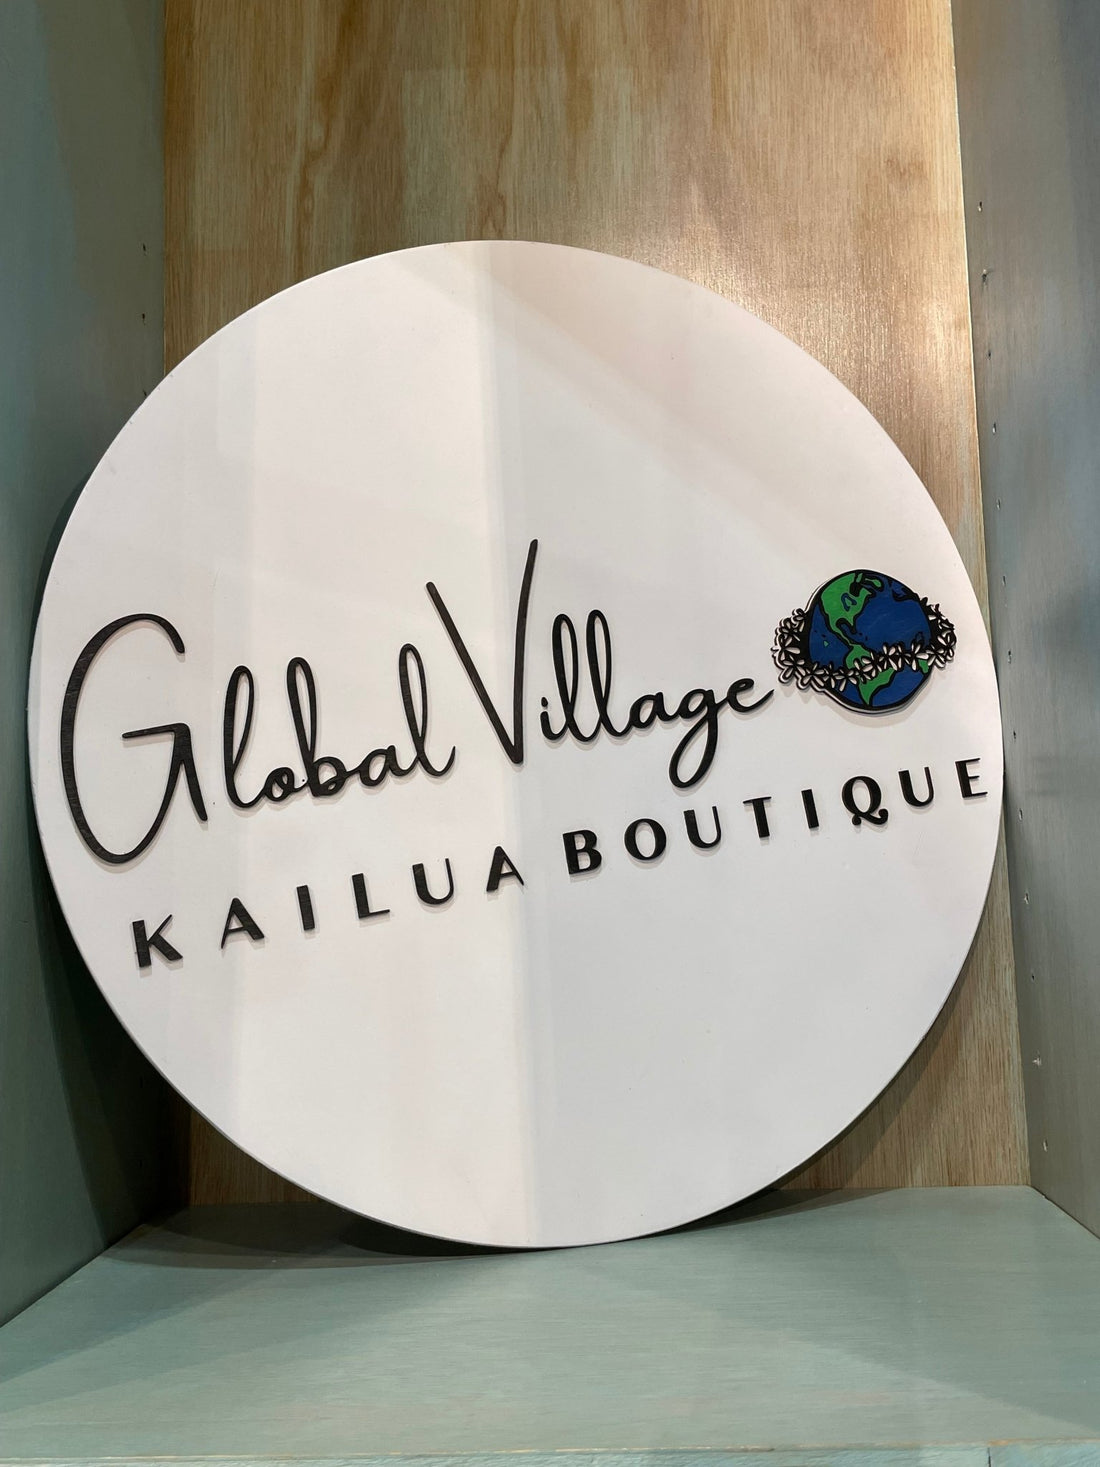 Whatʻs in a name - Global Village Kailua - Global Village Kailua Boutique